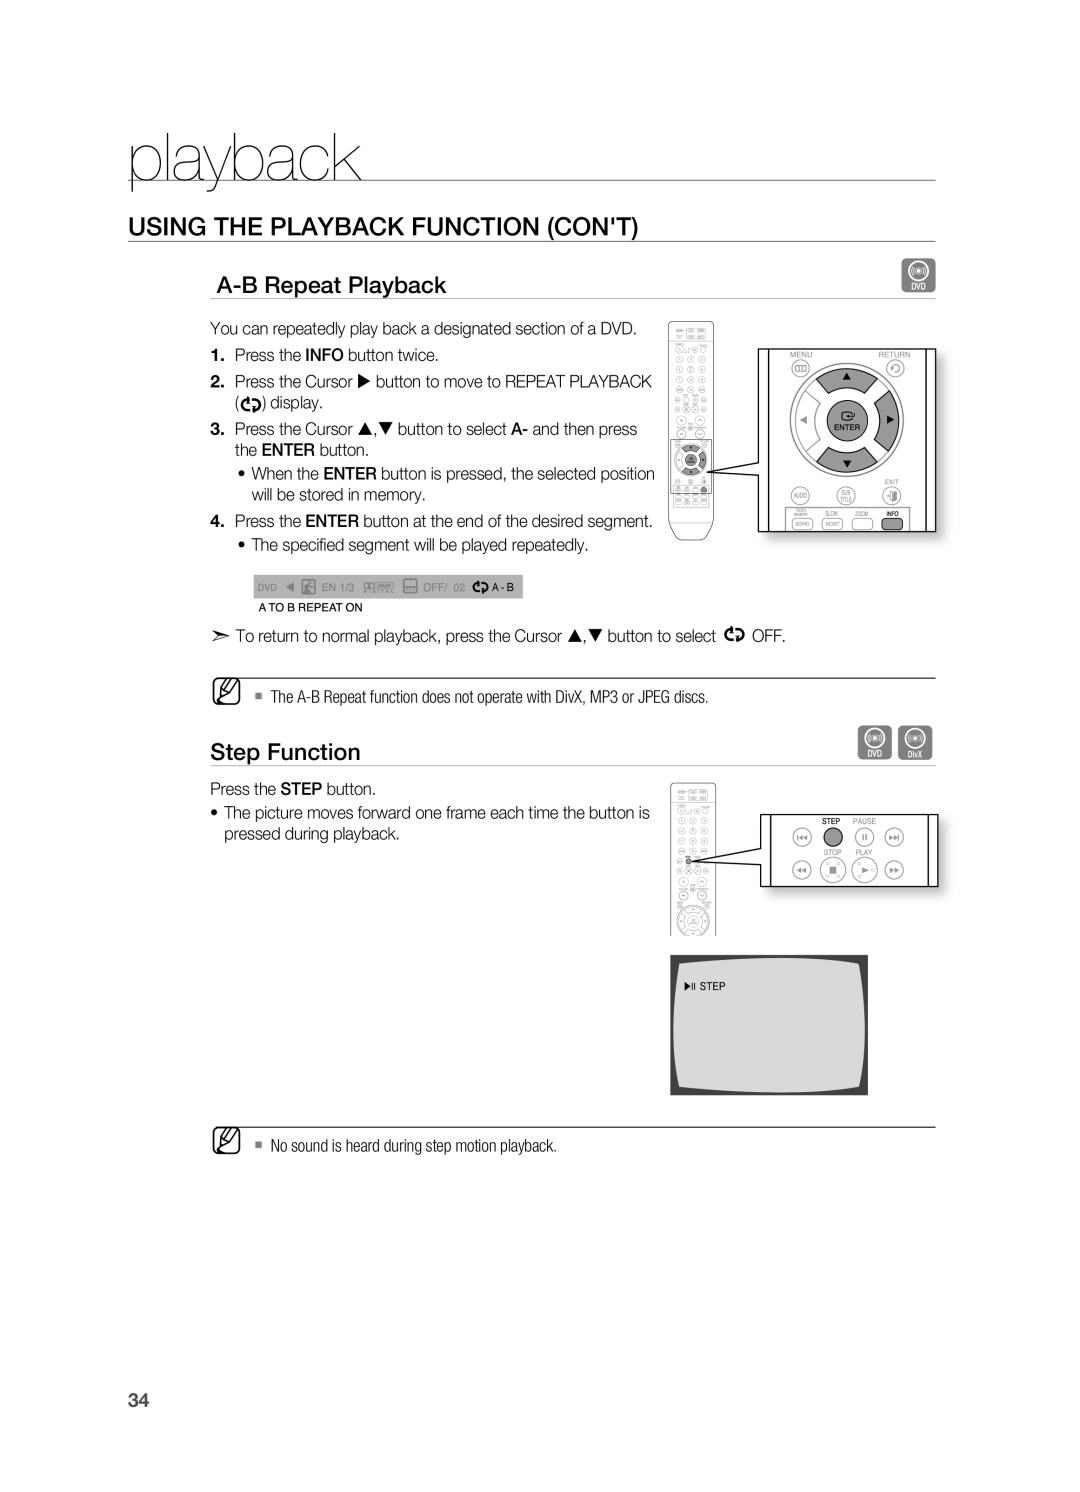 Samsung HT-X810 user manual A-Brepeat Playback, Step Function, playback, USING THE PlAYBACK FUNCTION CONT 